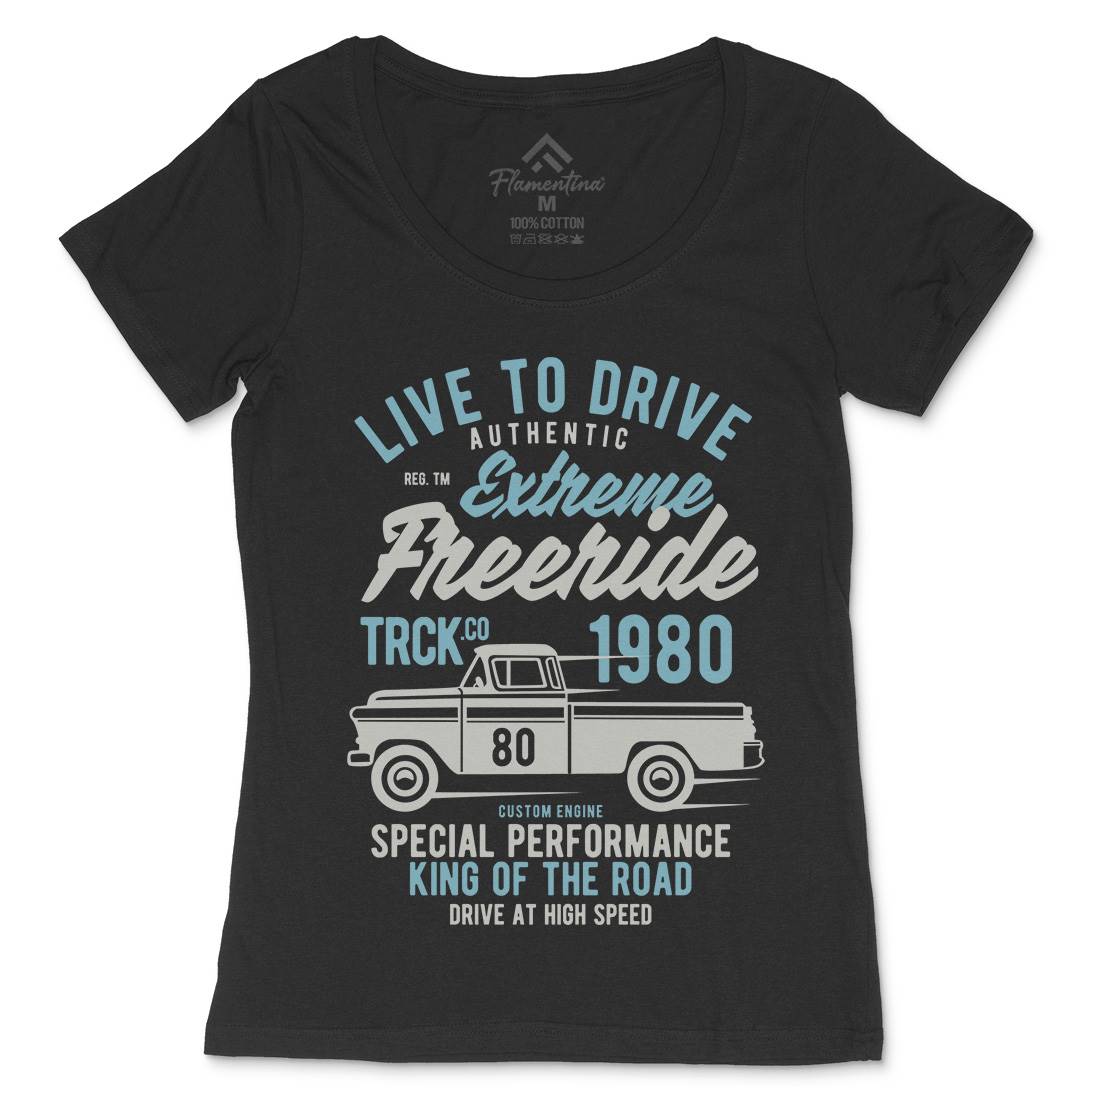 Extreme Freeride Truck Womens Scoop Neck T-Shirt Cars B401